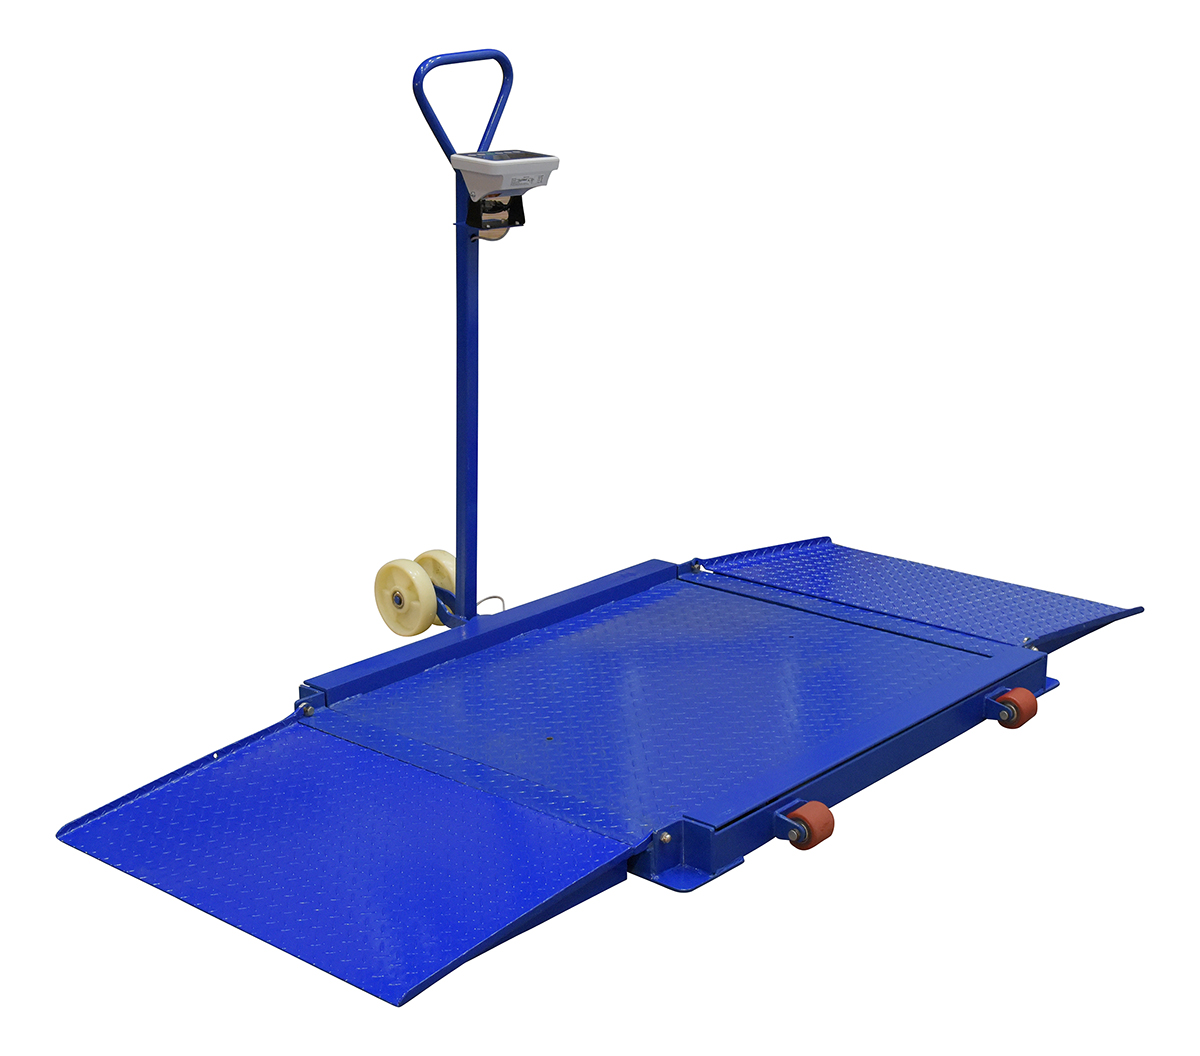 Fuji 2,000 kg Hand Pallet Scale, FDPS Series